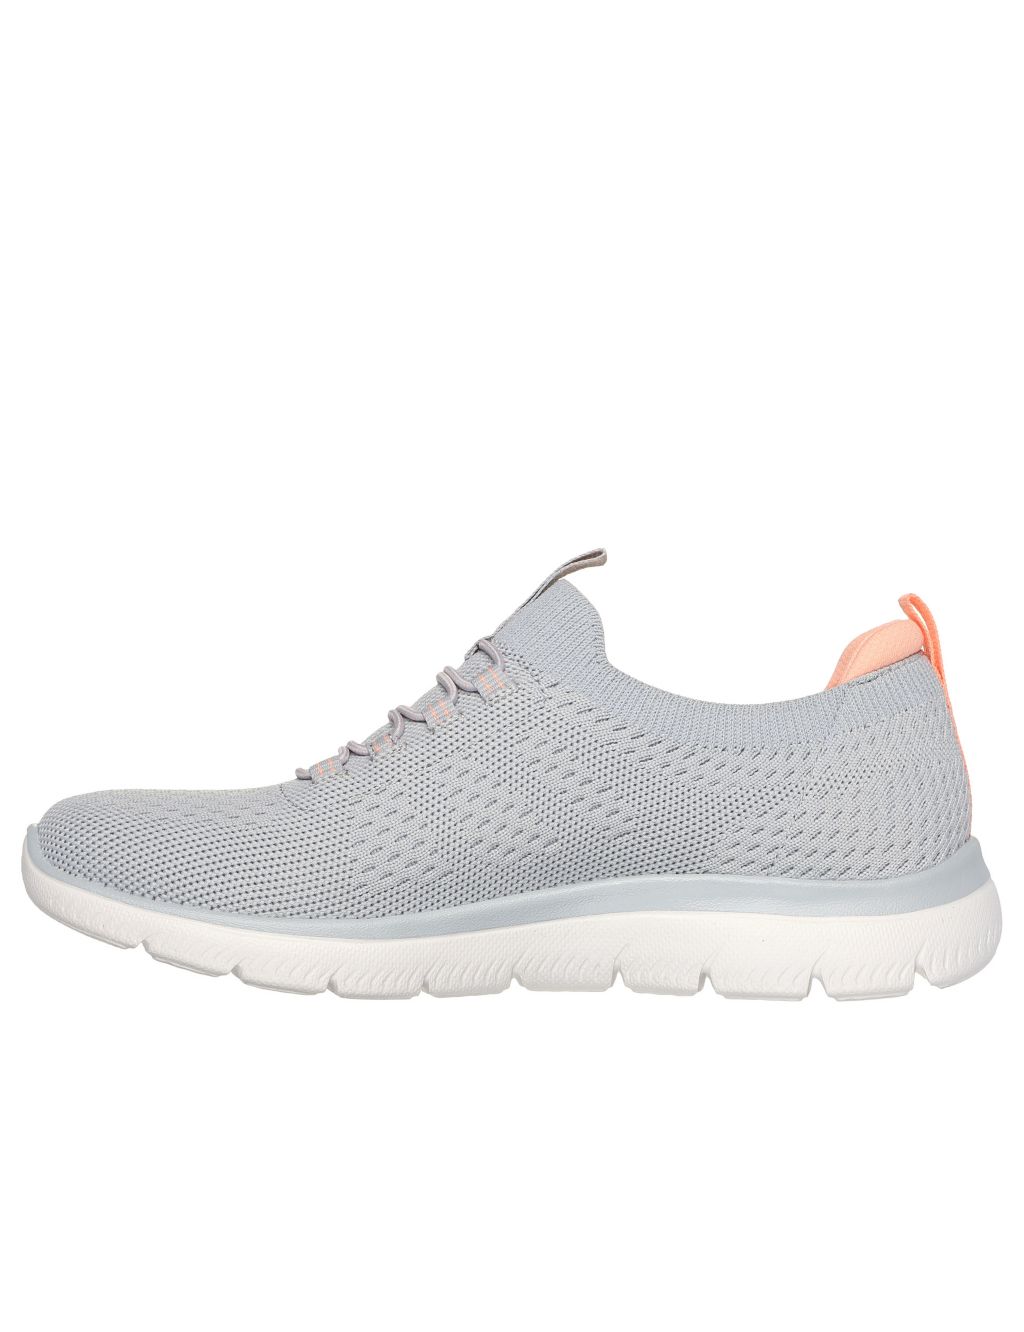 Summits Top Player Slip On Trainers | Skechers | M&S